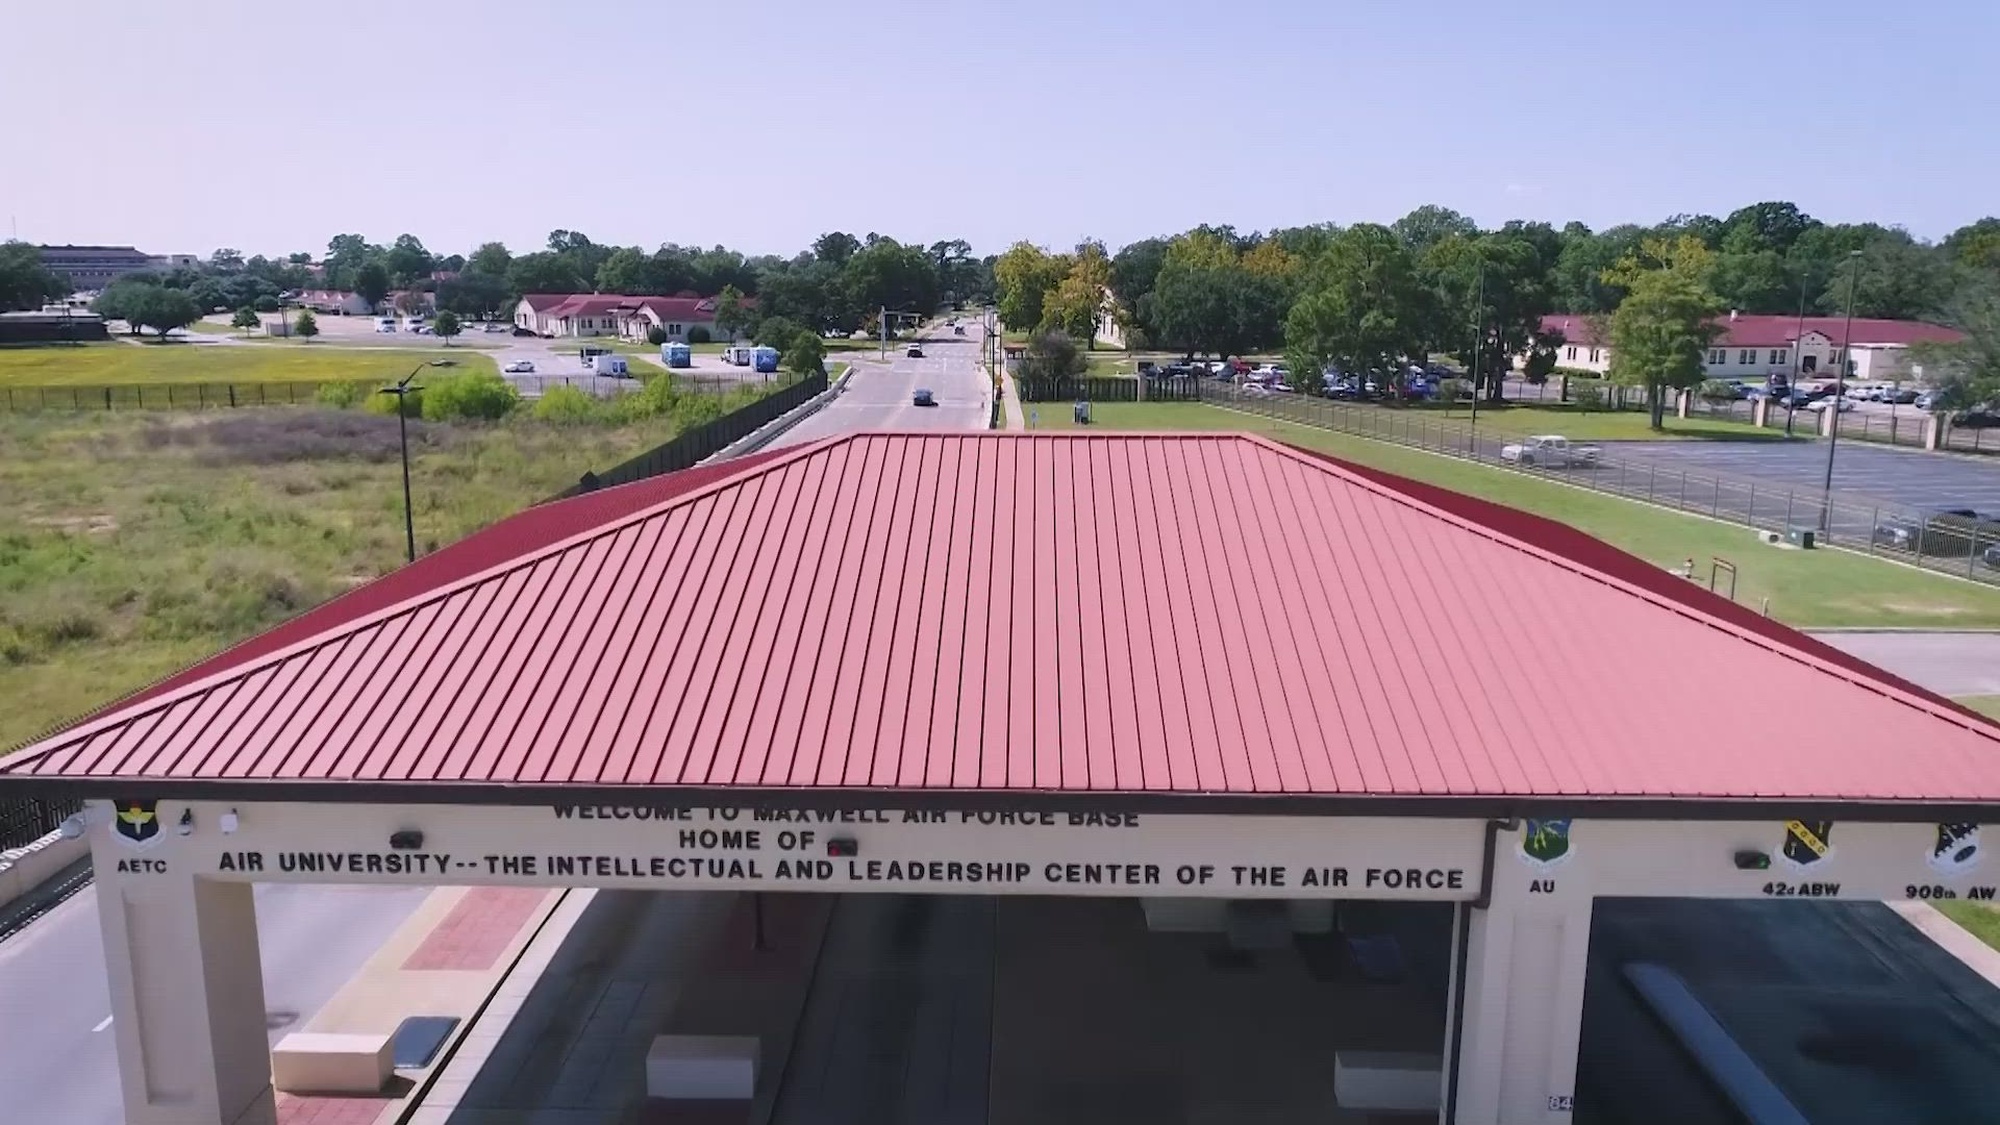 Welcome video for Maxwell Air Force Base, showcasing some of what the River Region has to offer!